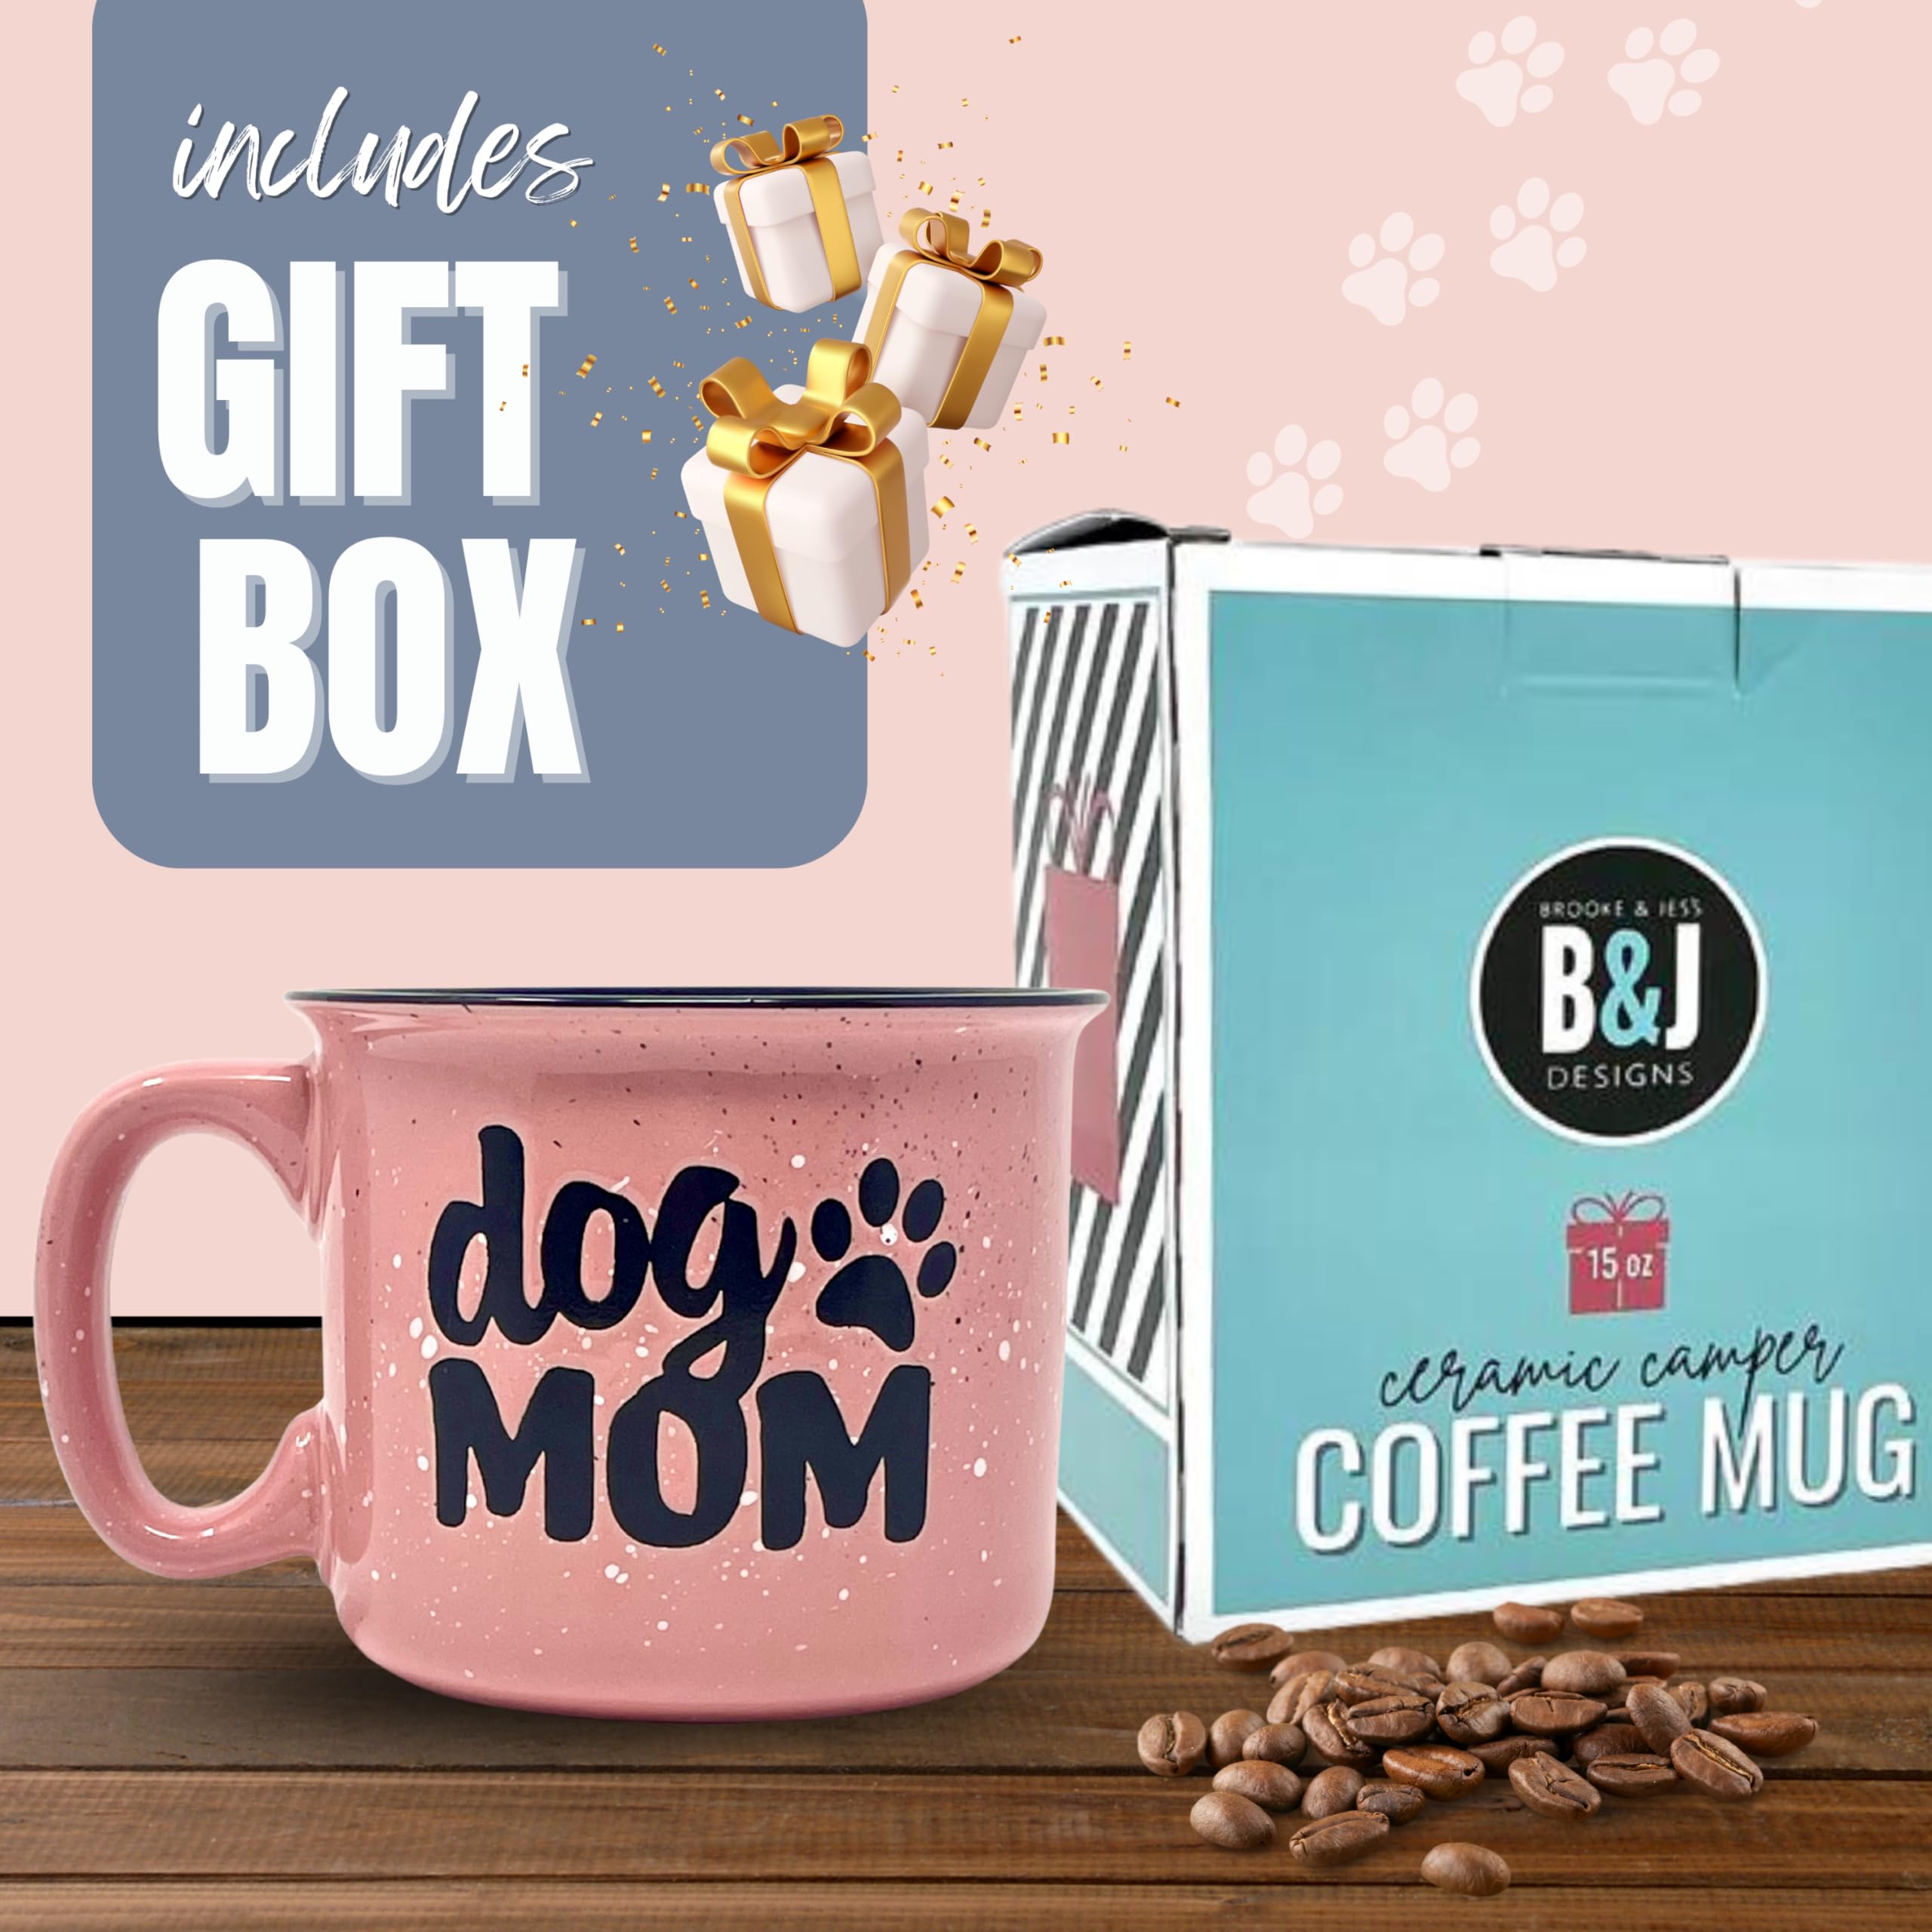 Cute Funny Coffee Mug for Dog Lovers - Dog Mom, Dog Dad, Fur Mama - Unique Fun Gifts for Her, Dad, Mom, Sister, Teacher, Coworkers - Coffee Cups & Mugs with Quotes